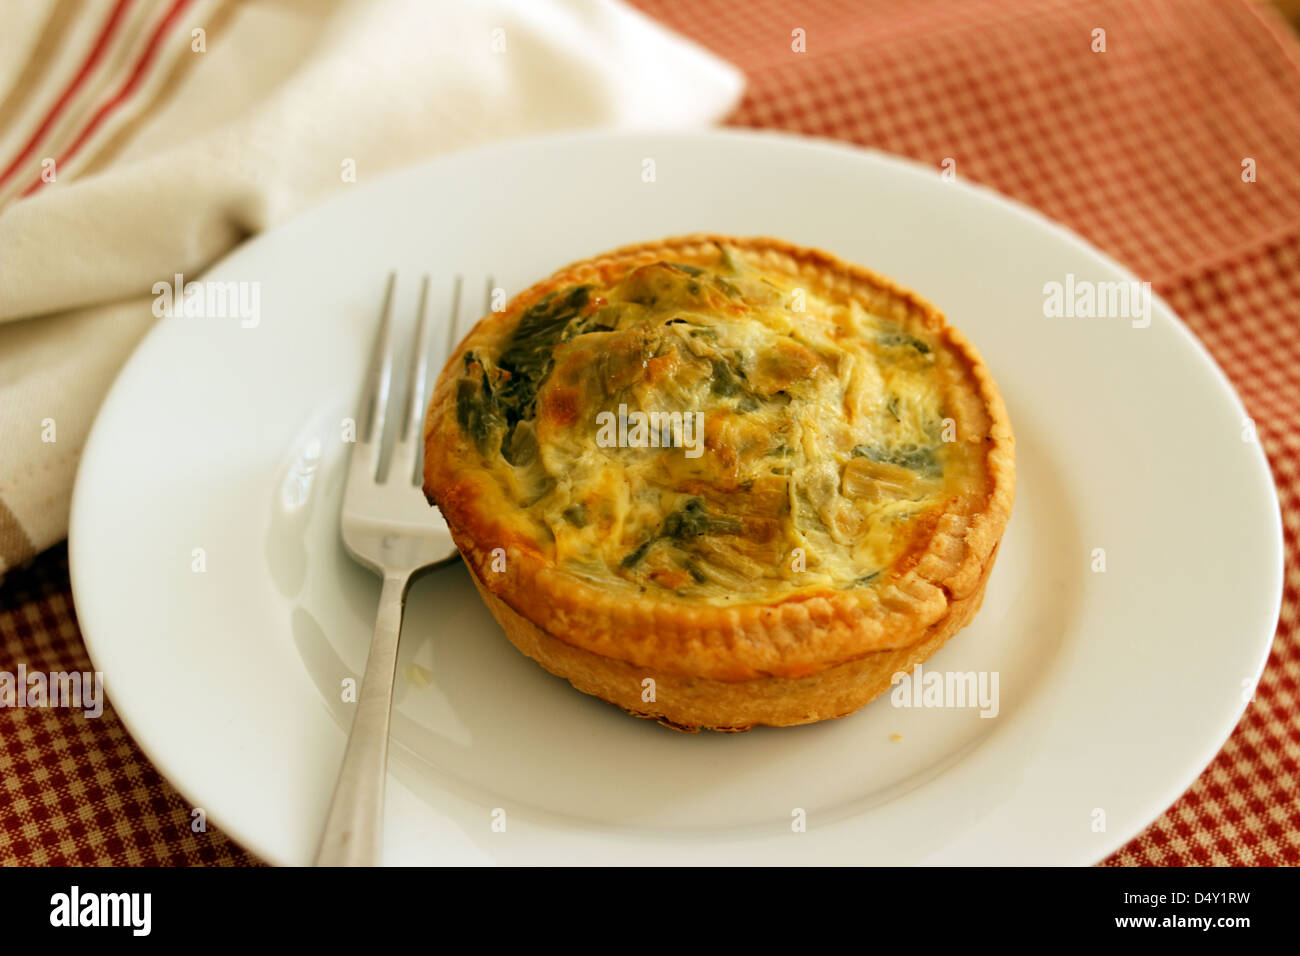 Leek Quiche tart on a white china plate with a fork on a red gingham tablecloth. Stock Photo